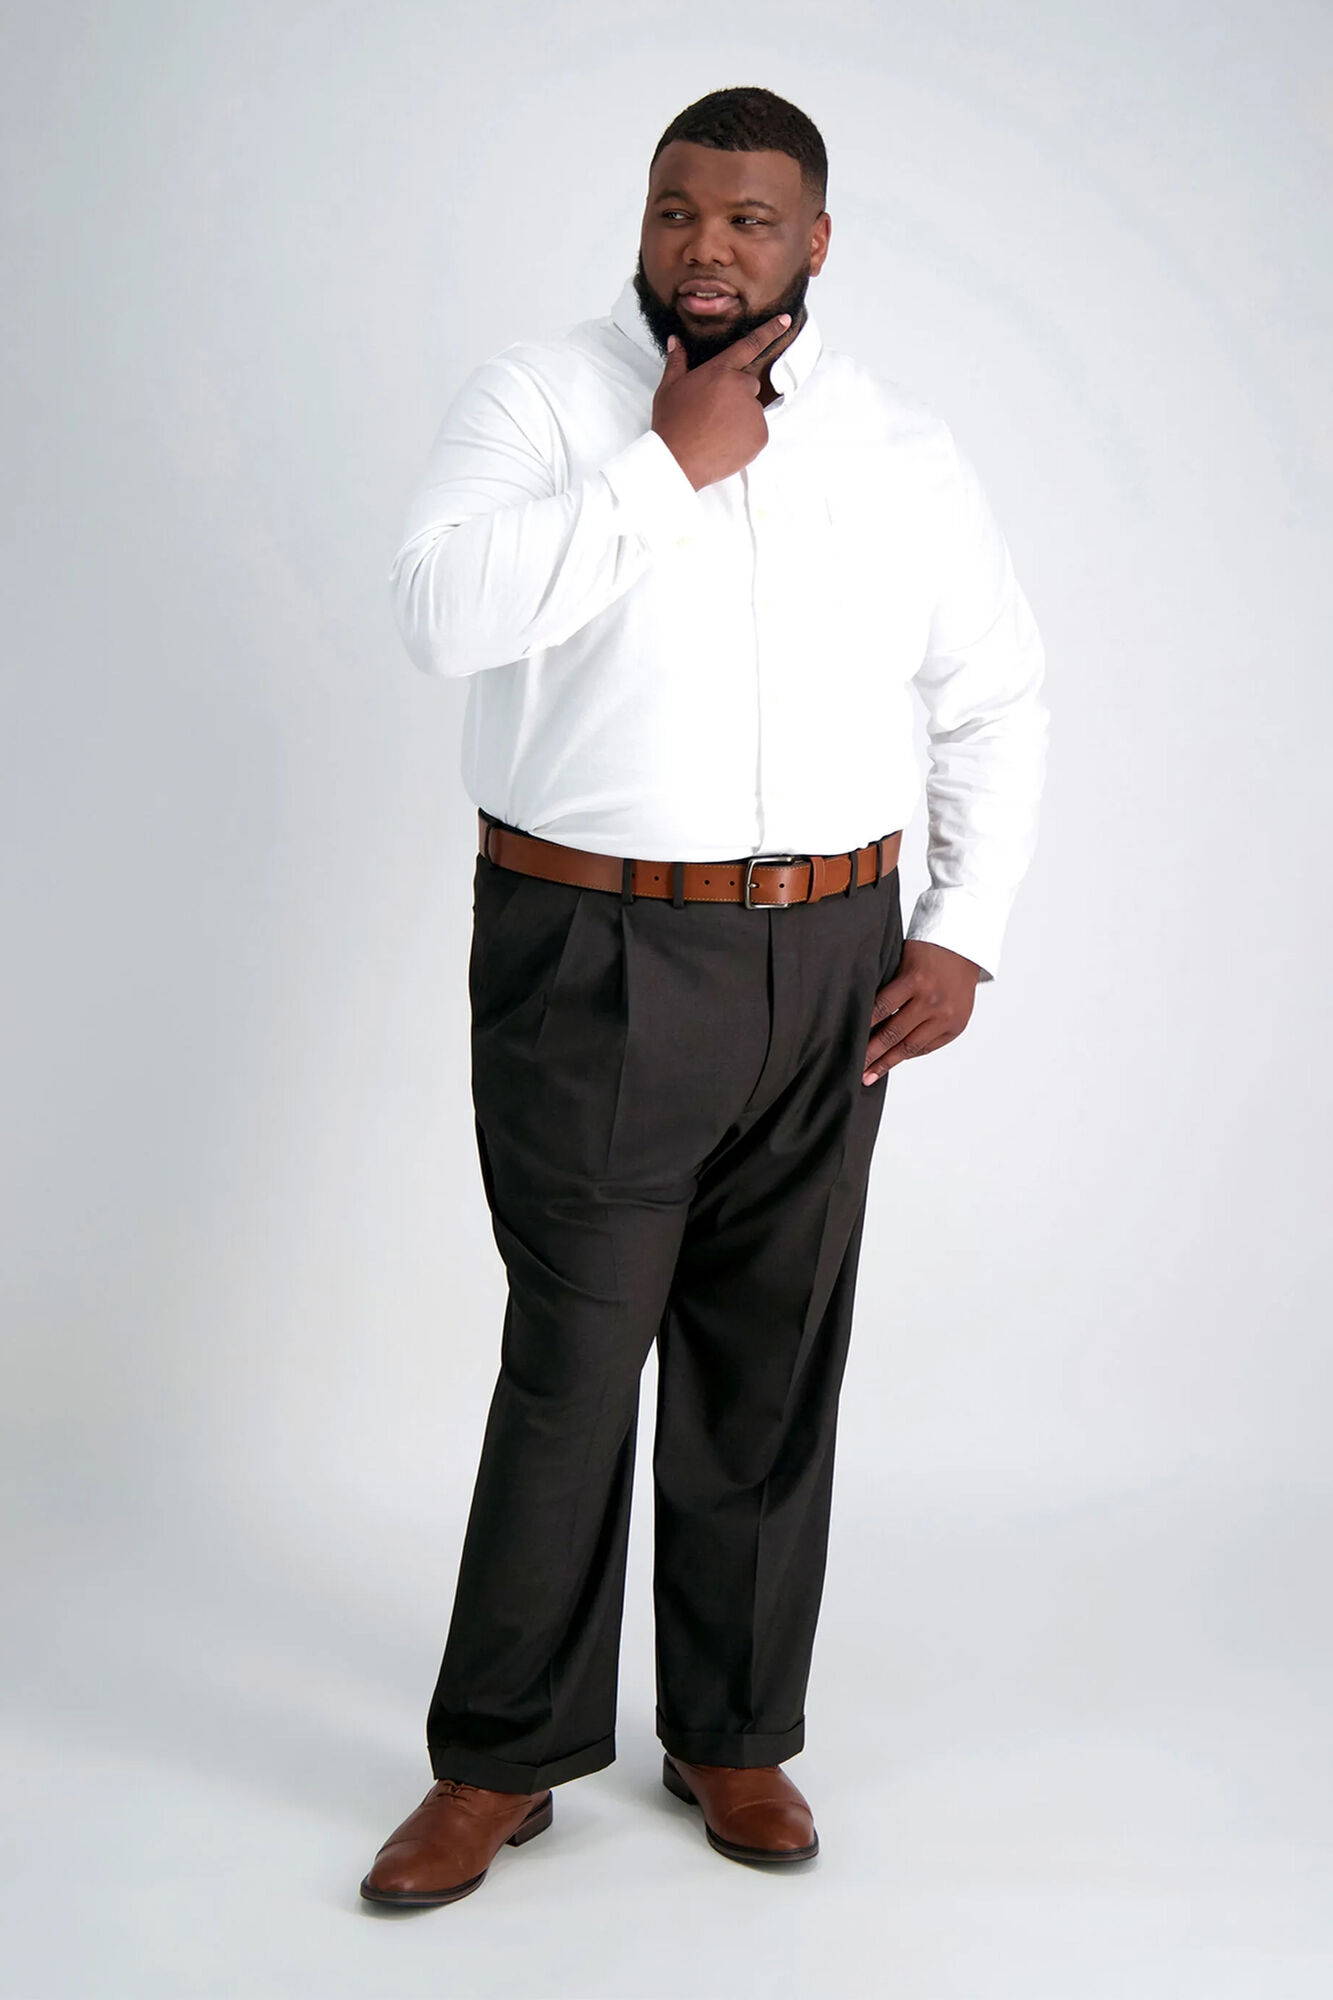 Big & Tall J.M. Haggar Premium Stretch Suit Pant - Pleated Front Chocolate Big & Tall Classic Fit Pleated Front Hidden Expandable Waistband: Expands up to 3" 64% Polyester, 34% Viscoe Rayon 2% Spandex Dry Clean Only Imported Style #: HY91182 Size - NoSz